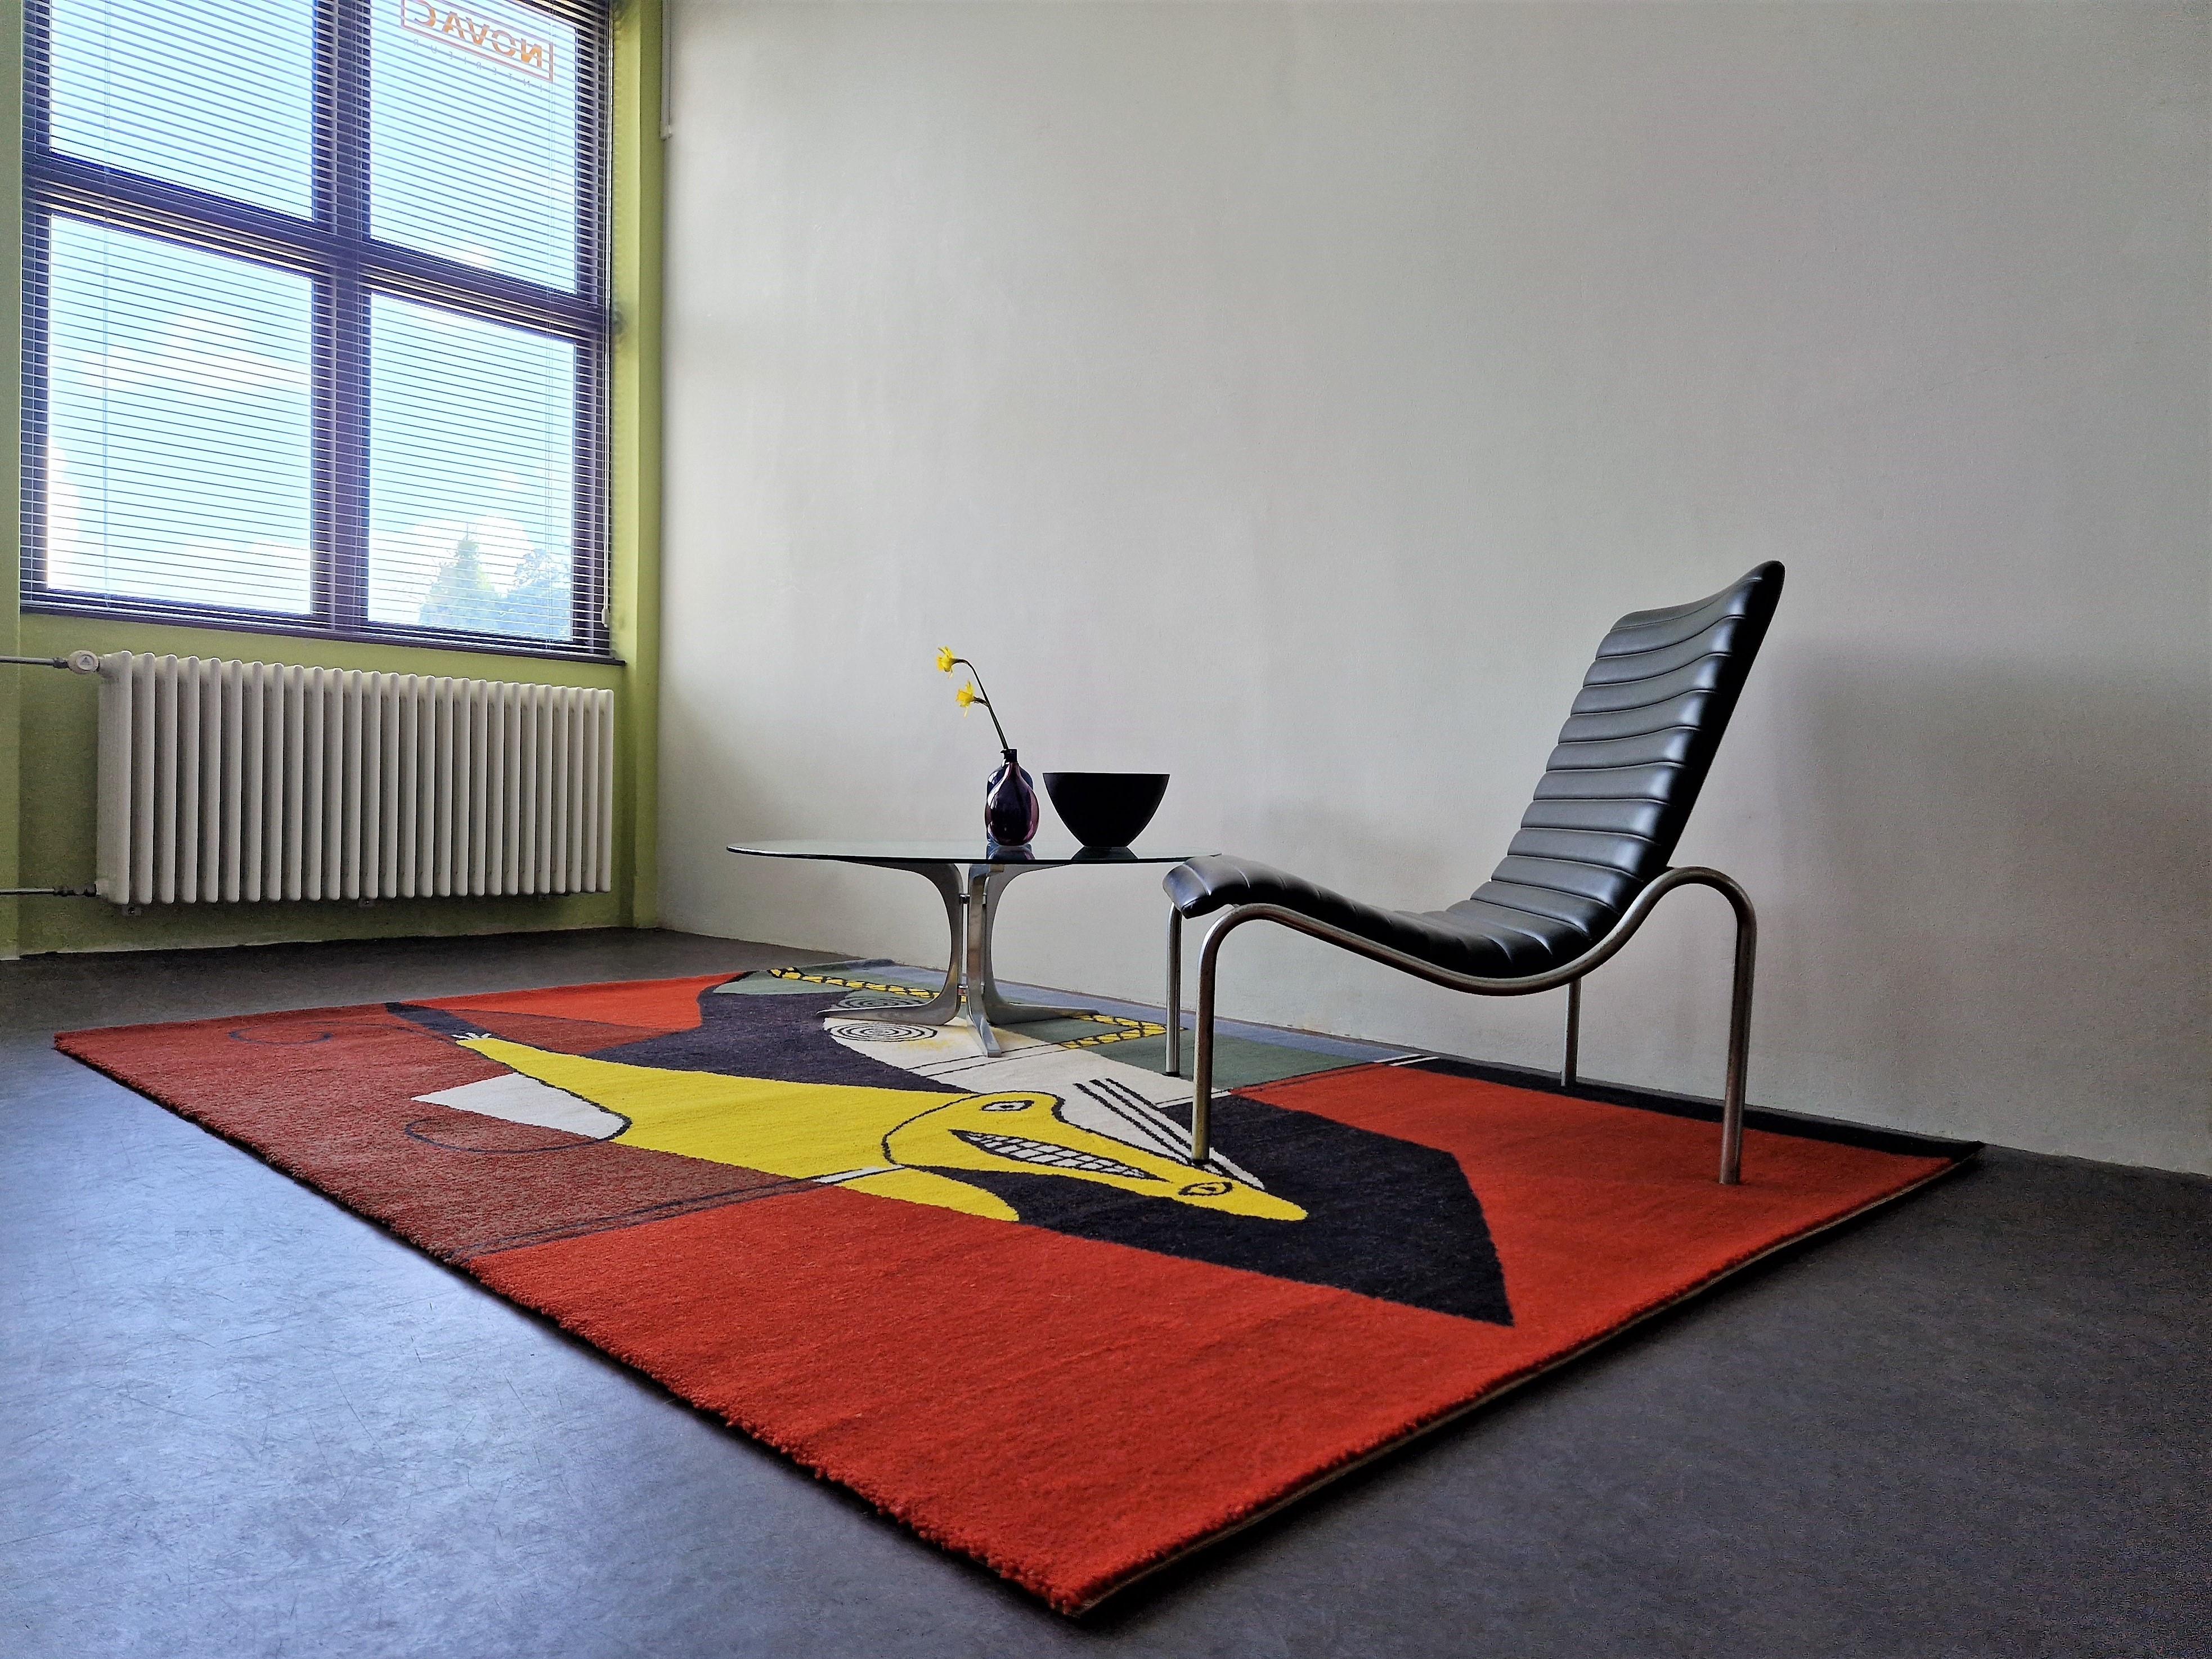 Dutch Large New Zealand Wool Carpet 'La Figura' After Artwork by Picasso Made by Desso For Sale